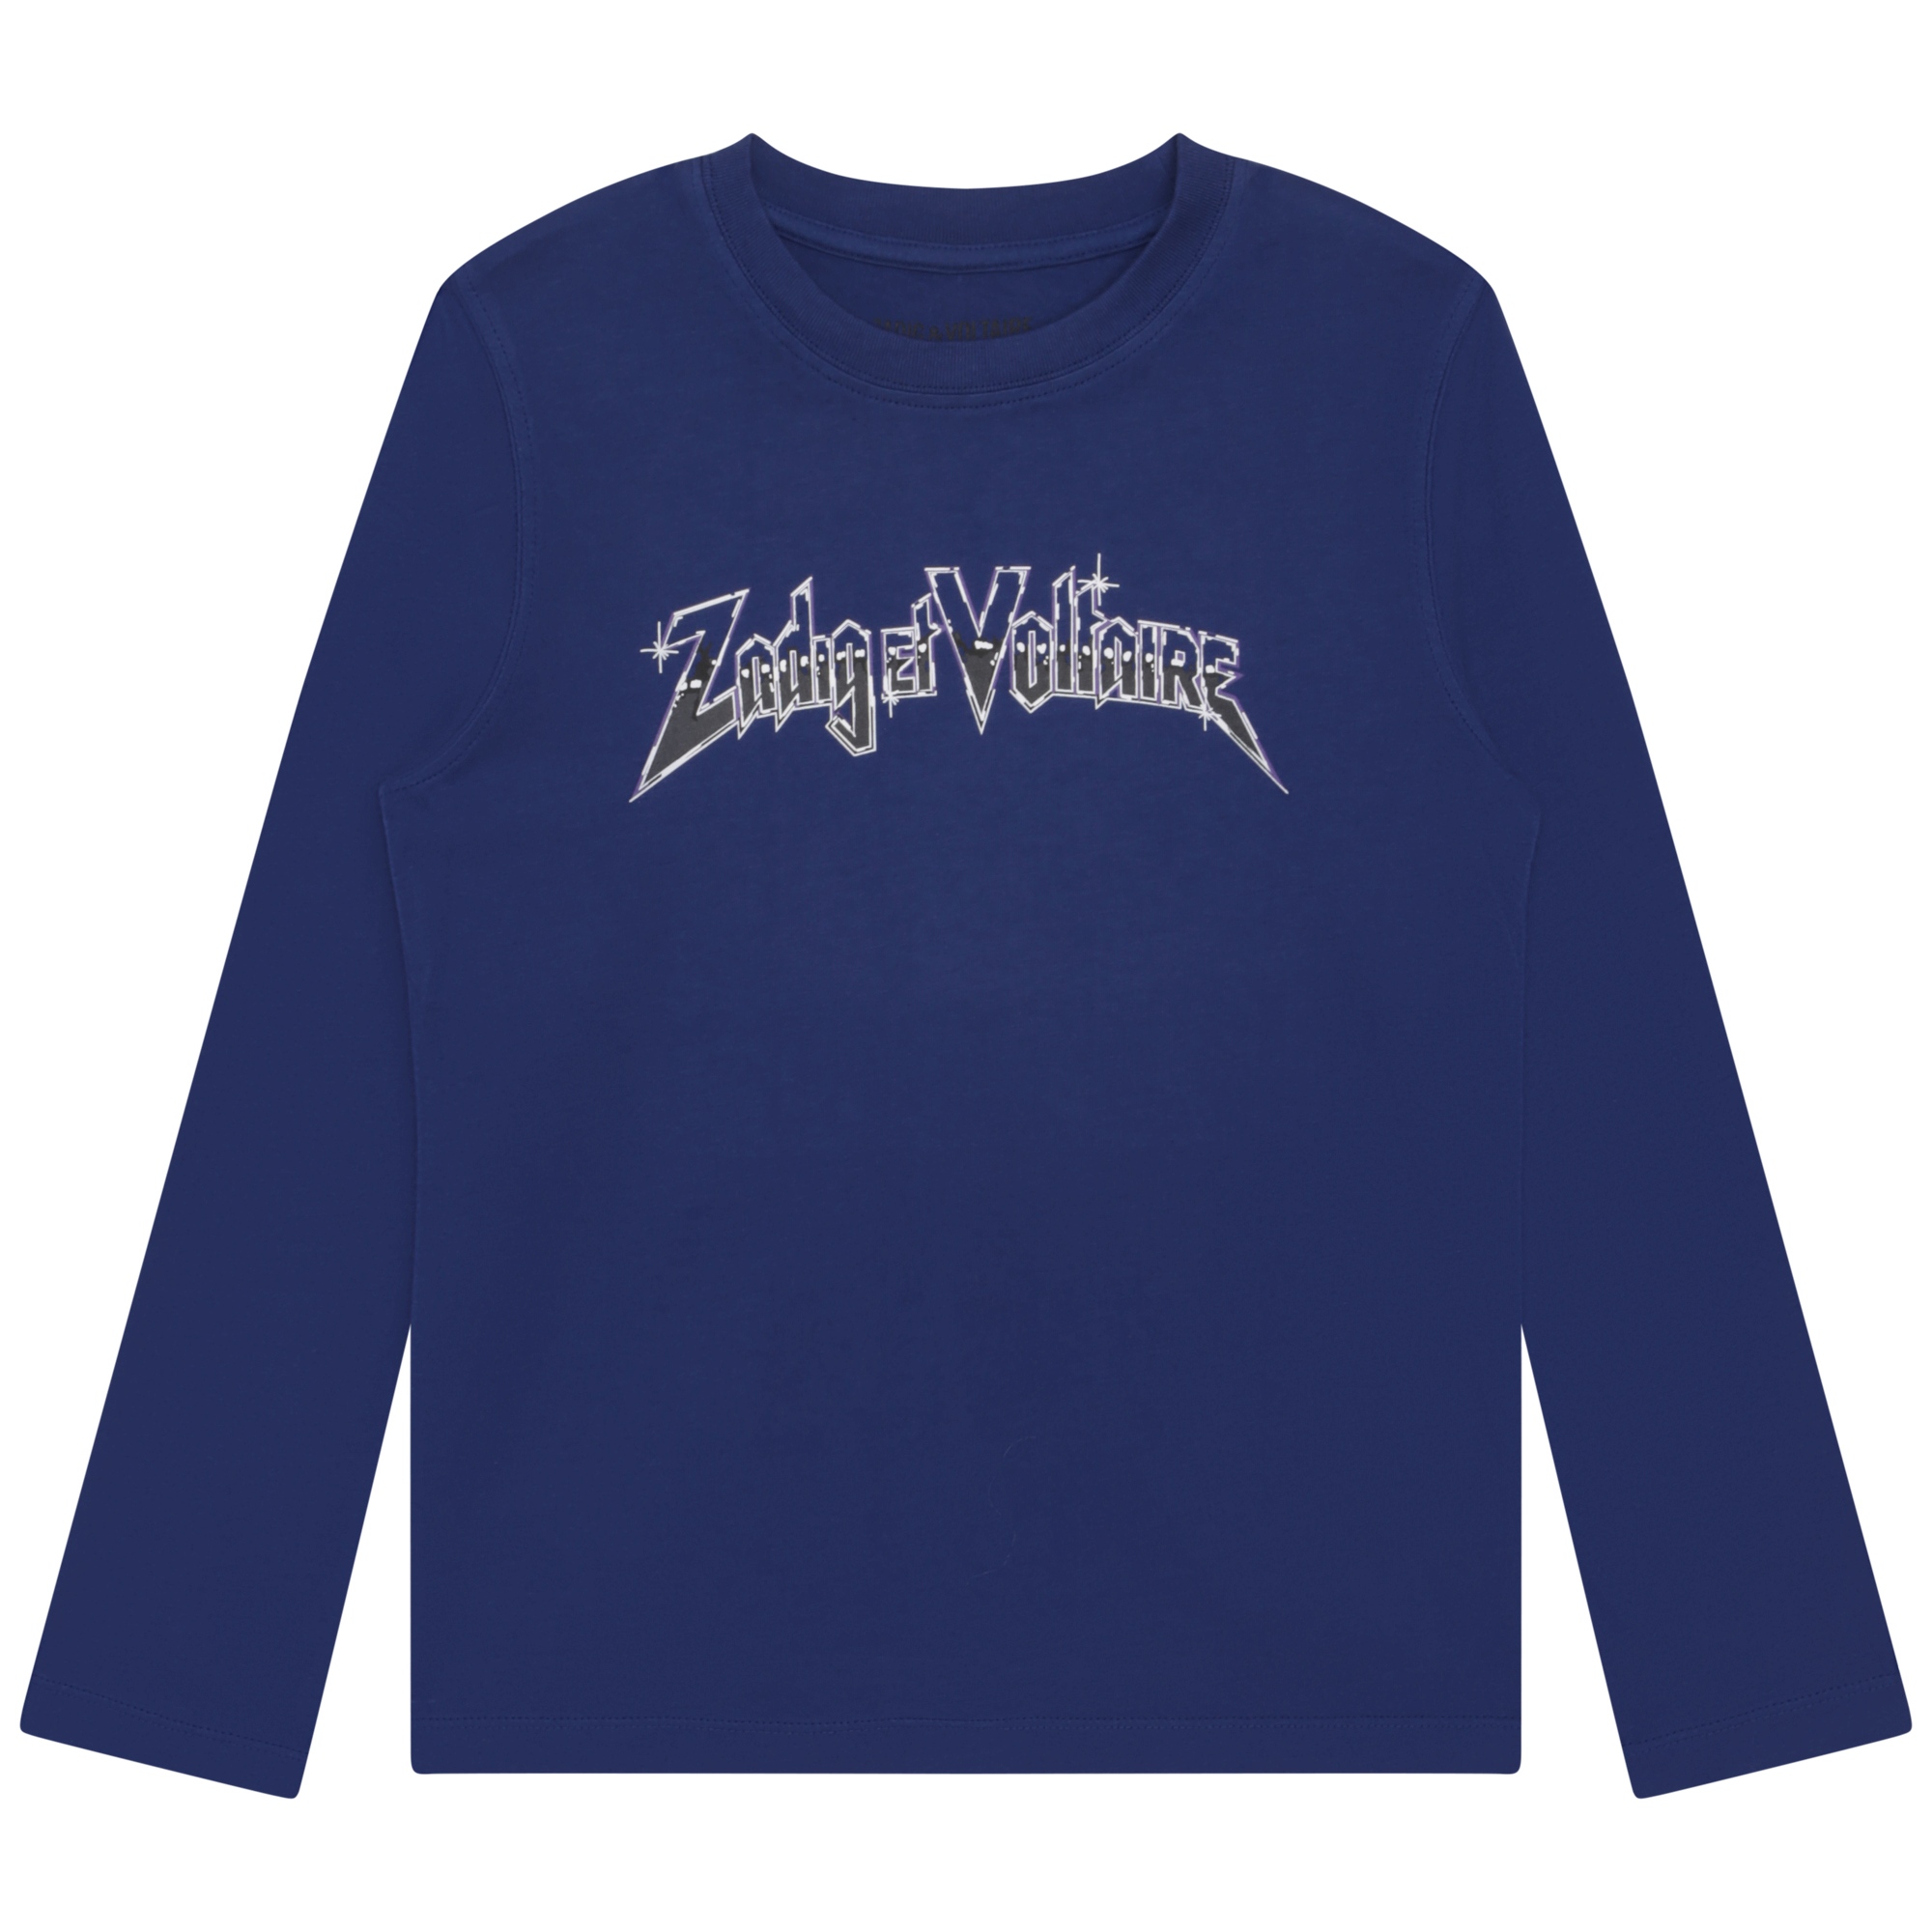 Long-sleeved T-shirt ZADIG & VOLTAIRE for BOY